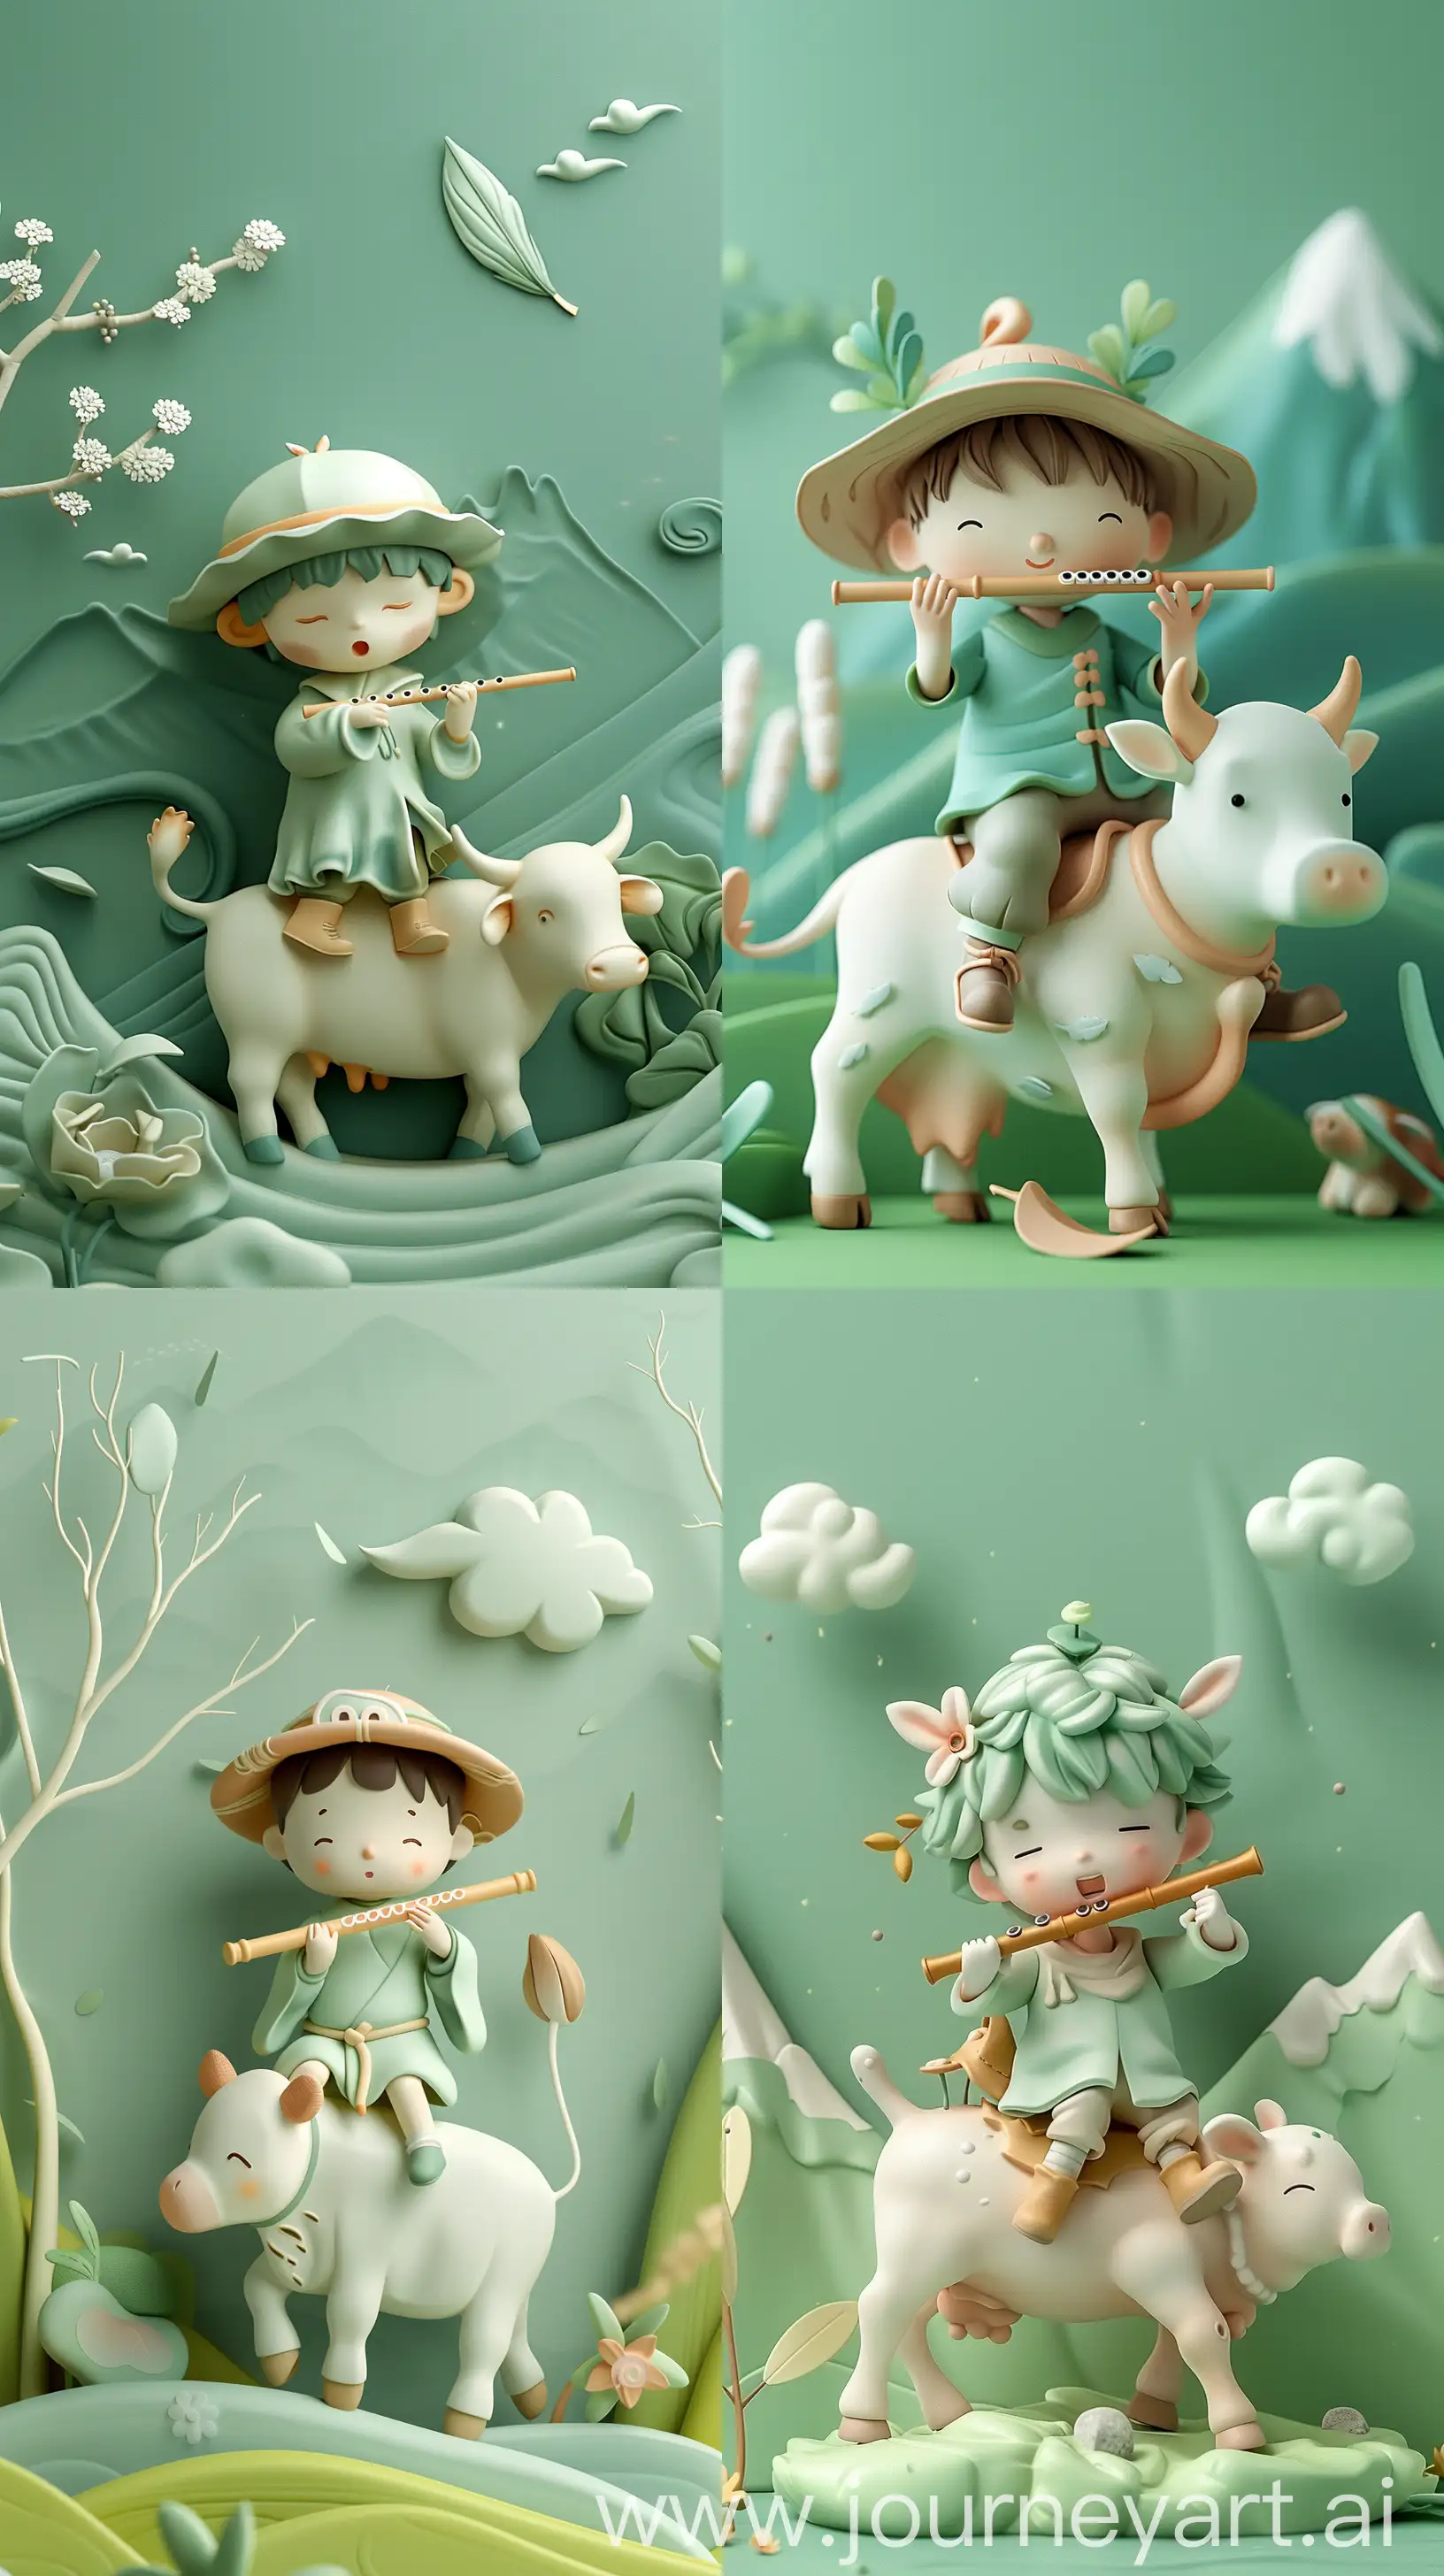 
3D, cute, green background, Fabric materials, Dopamine color scheme, light green soft blue, A shepherd boy with a flute riding on a cow, In the distance is a mountain, Willow leaf, —ar 9:16 —stylize 250